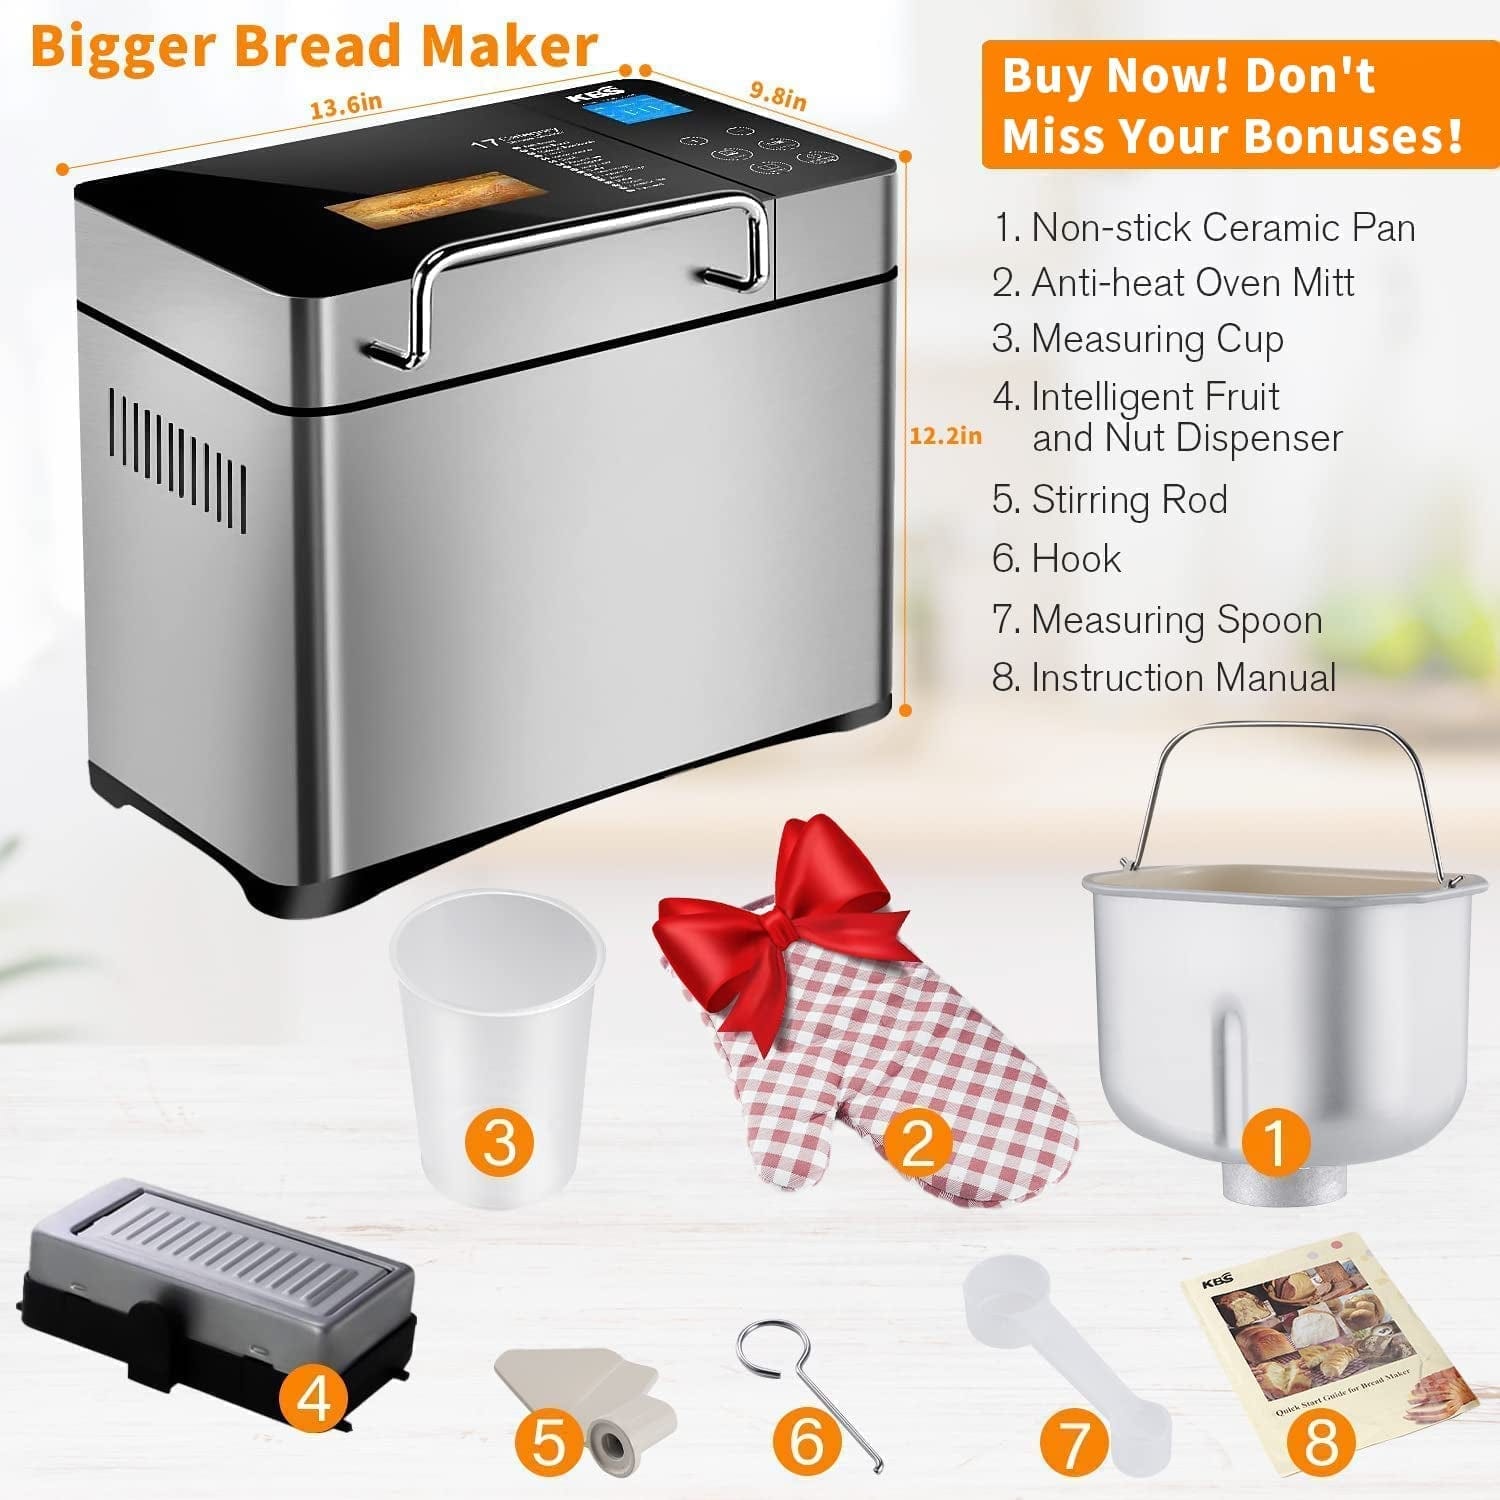 https://kol.pet/cdn/shop/products/kbs-large-17-in-1-bread-machine-2lb-all-stainless-steel-bread-maker-with-auto-fruit-nut-dispenser-nonstick-ceramic-pan-full-touch-panel-tempered-glass-reserve-keep-warm-set-oven-mitt_d8048bdb-c8c1-4eb2-9d53-831e596535e2_1946x.jpg?v=1675557547